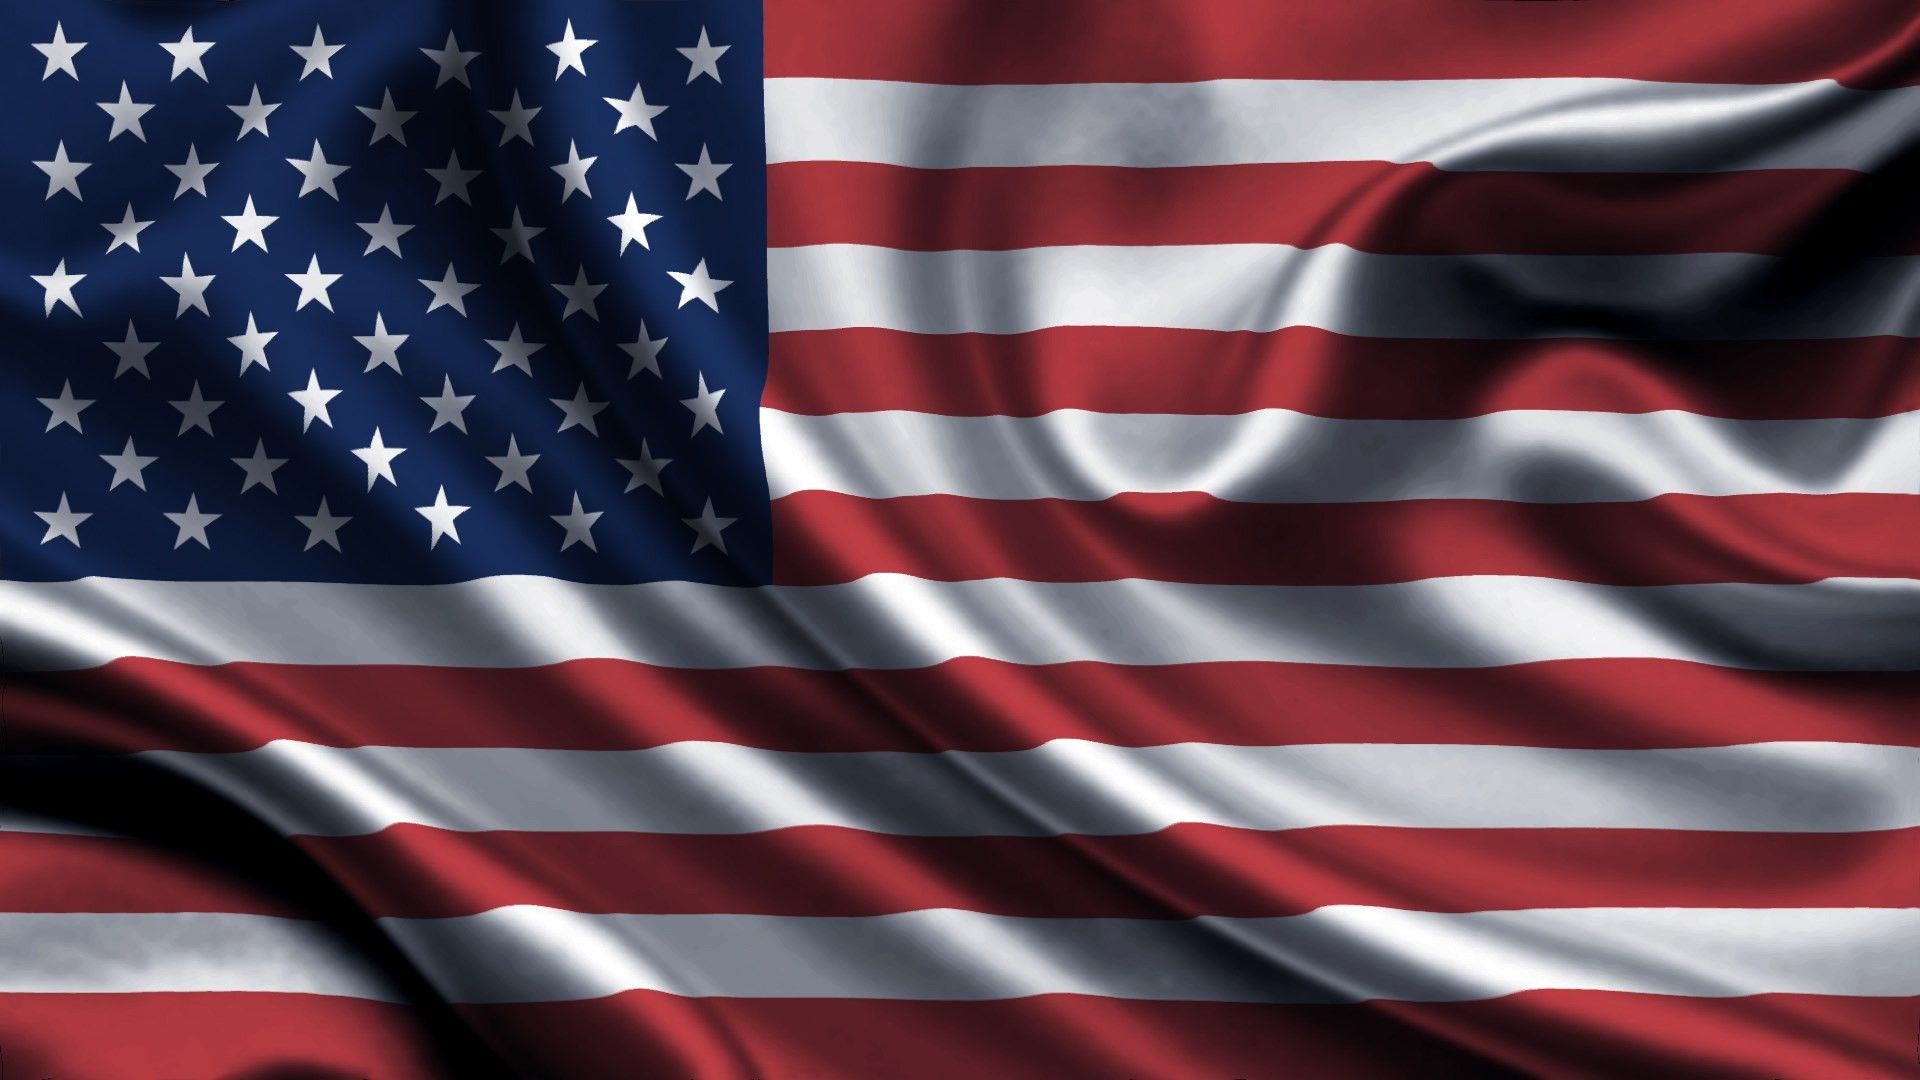 American Flag Wallpaper 1920x1080. Background. Photo. Image